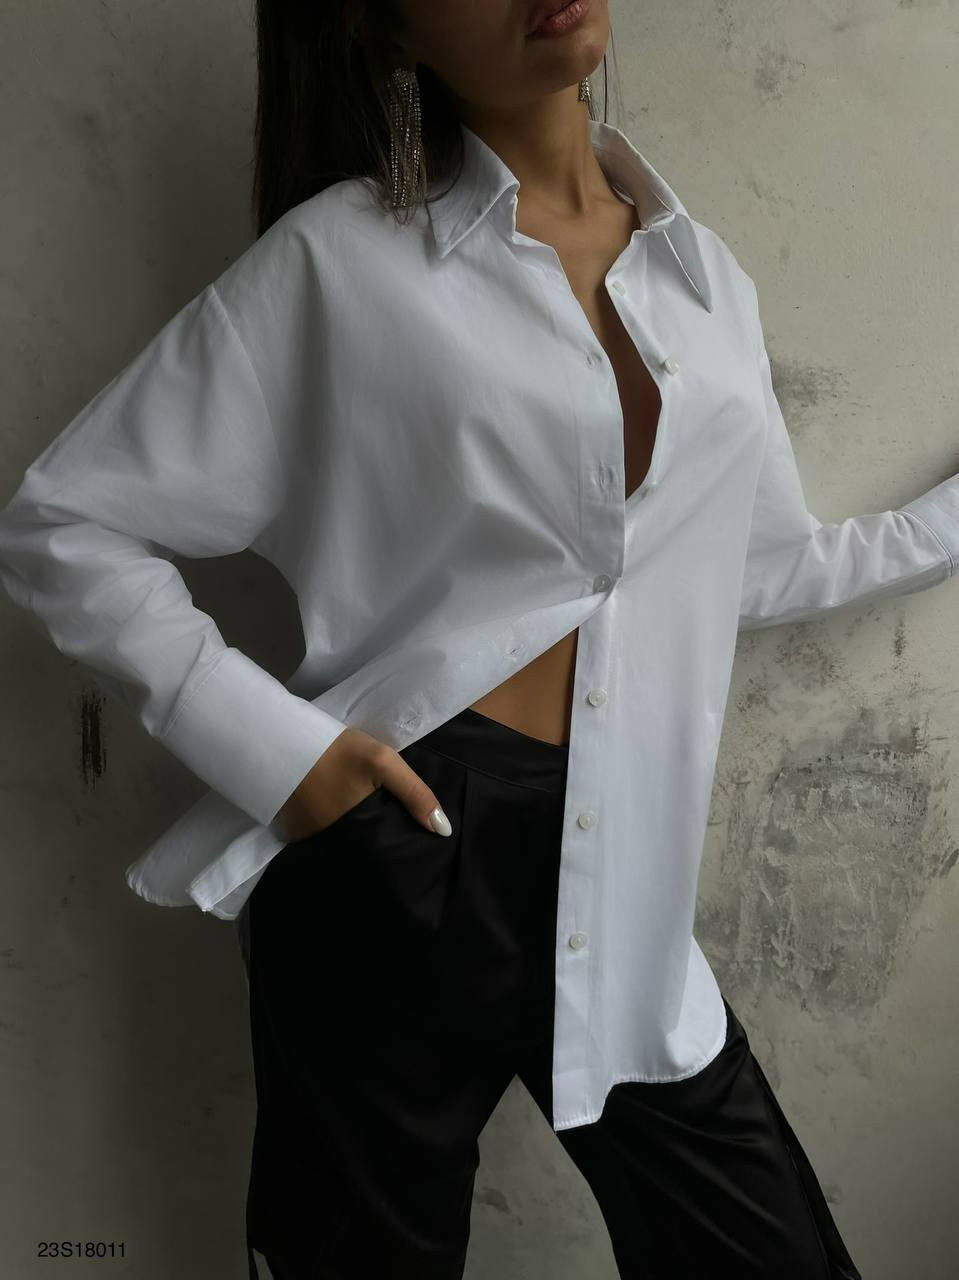 Backless Long Sleeveless Lace-up Shirt in White Color - Noxlook